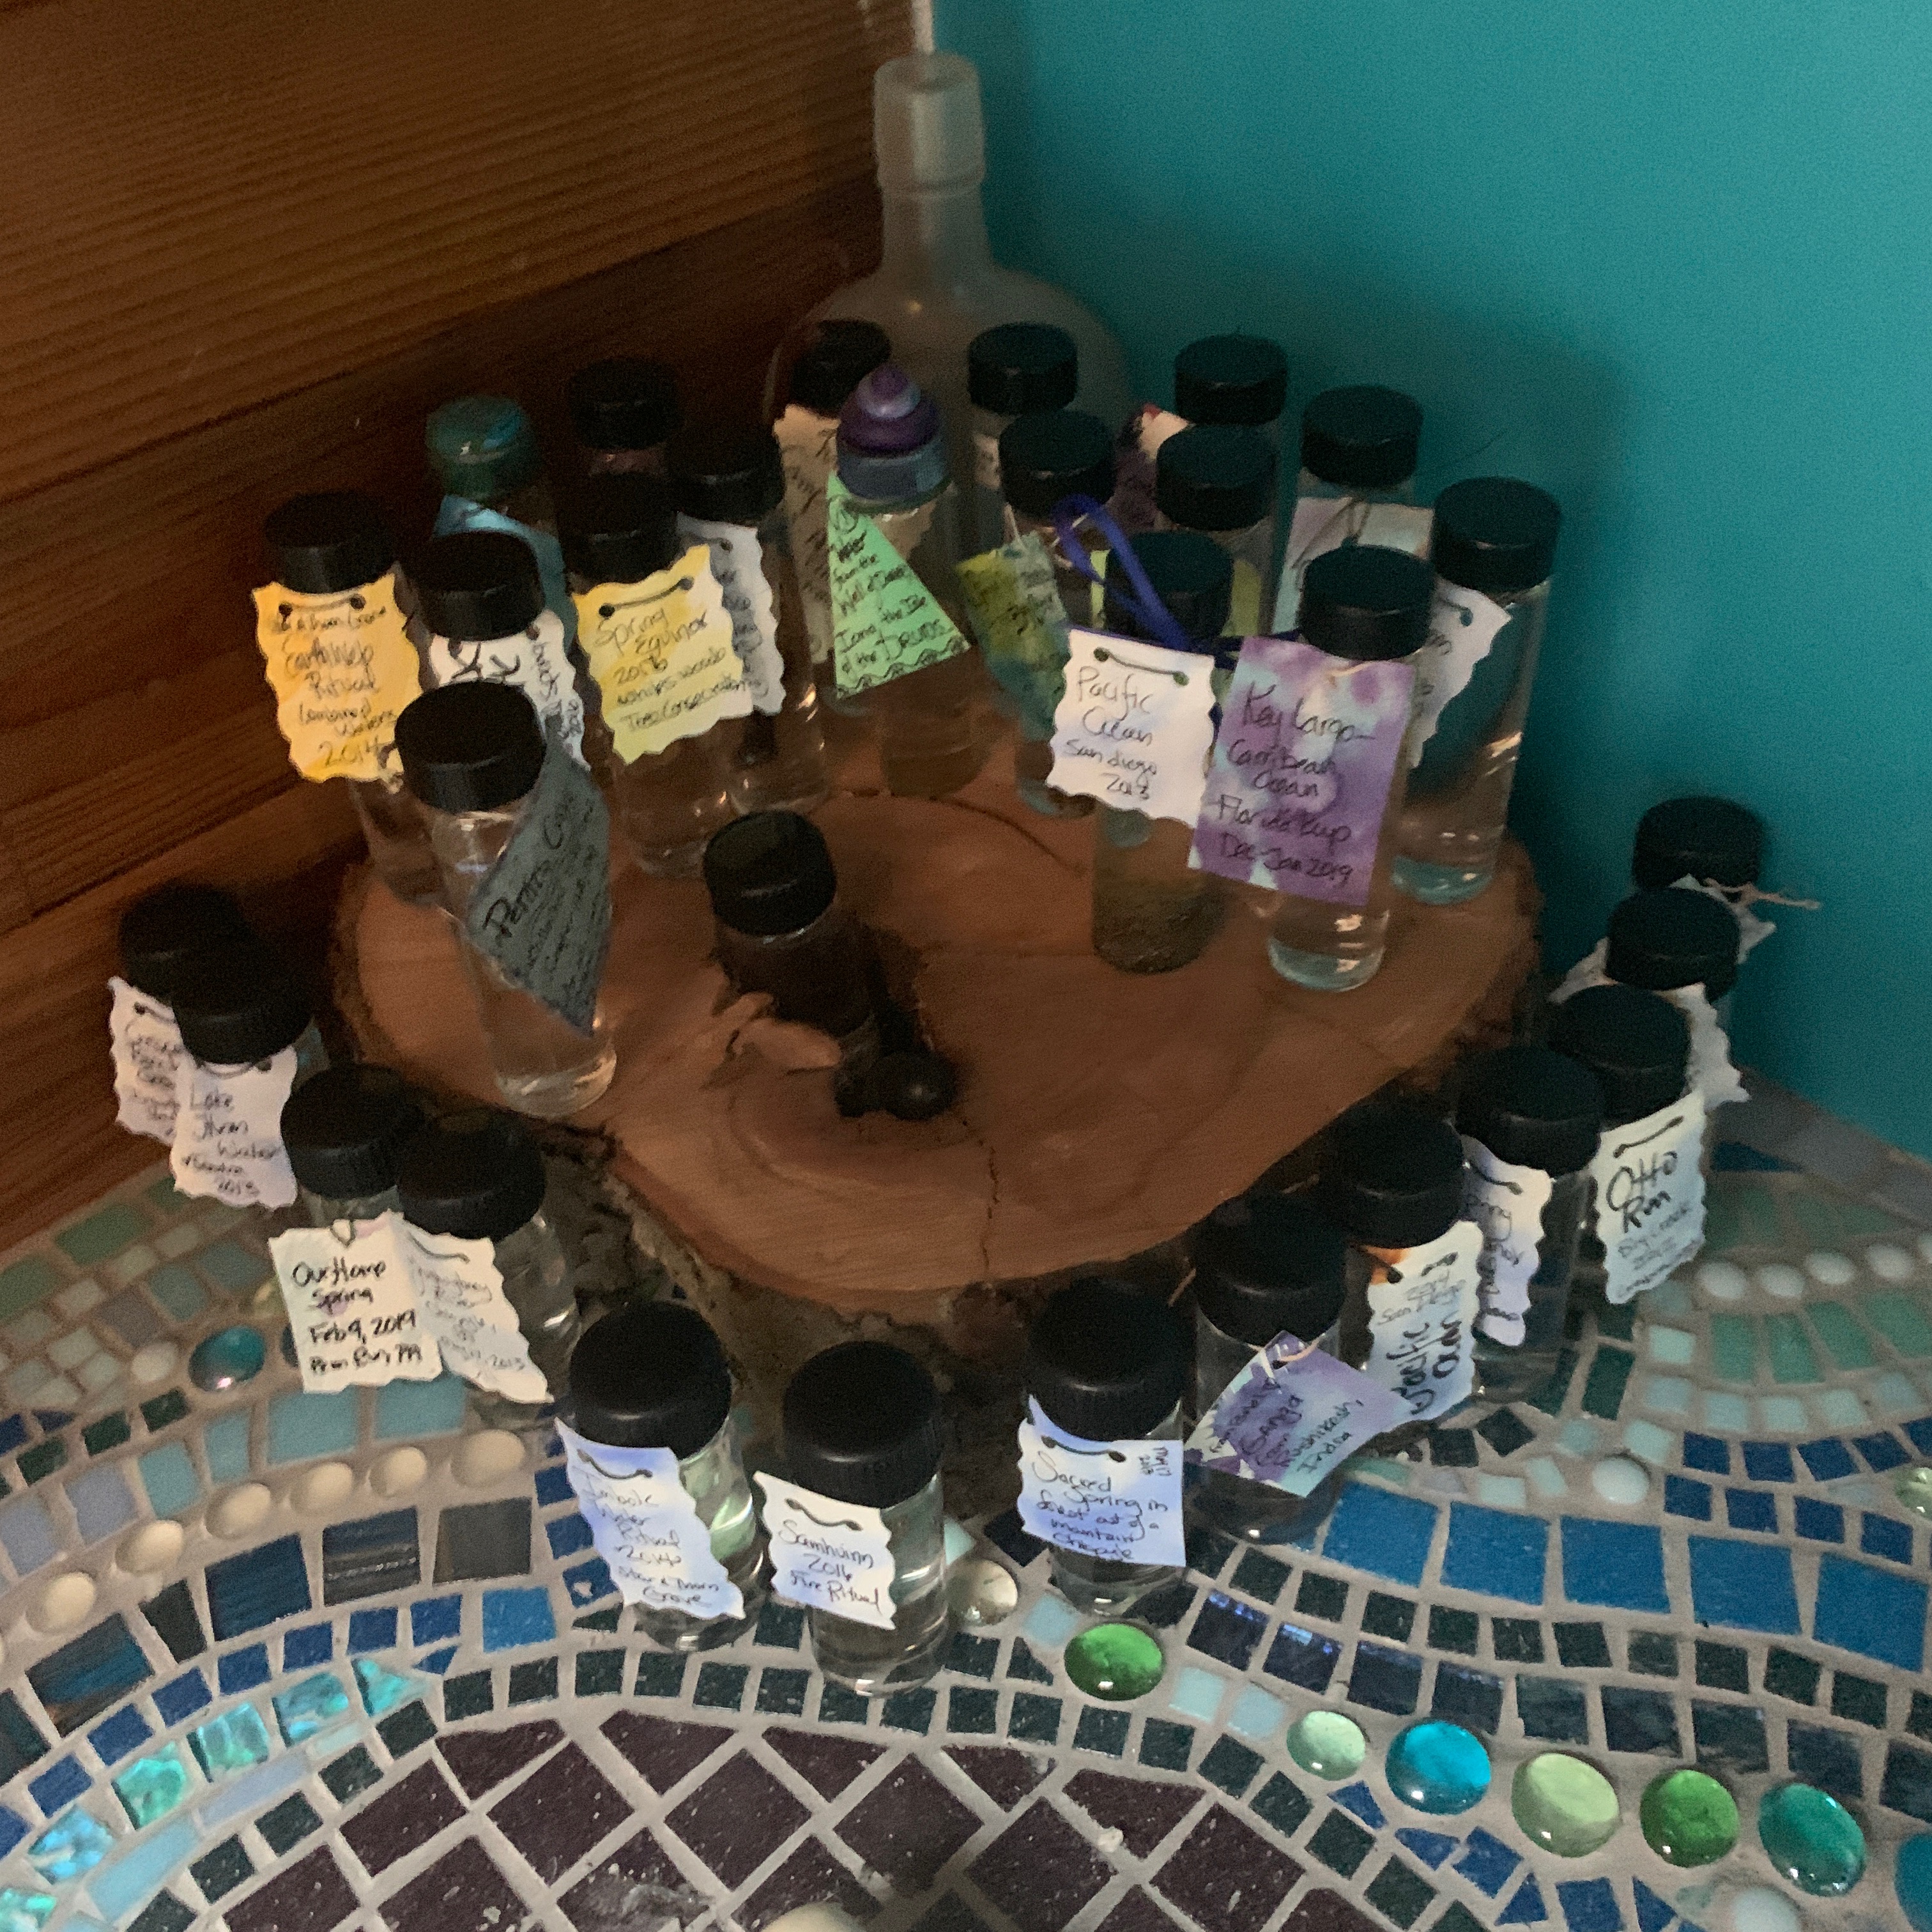 My sacred water shrine, which currently may be in need of expansion!